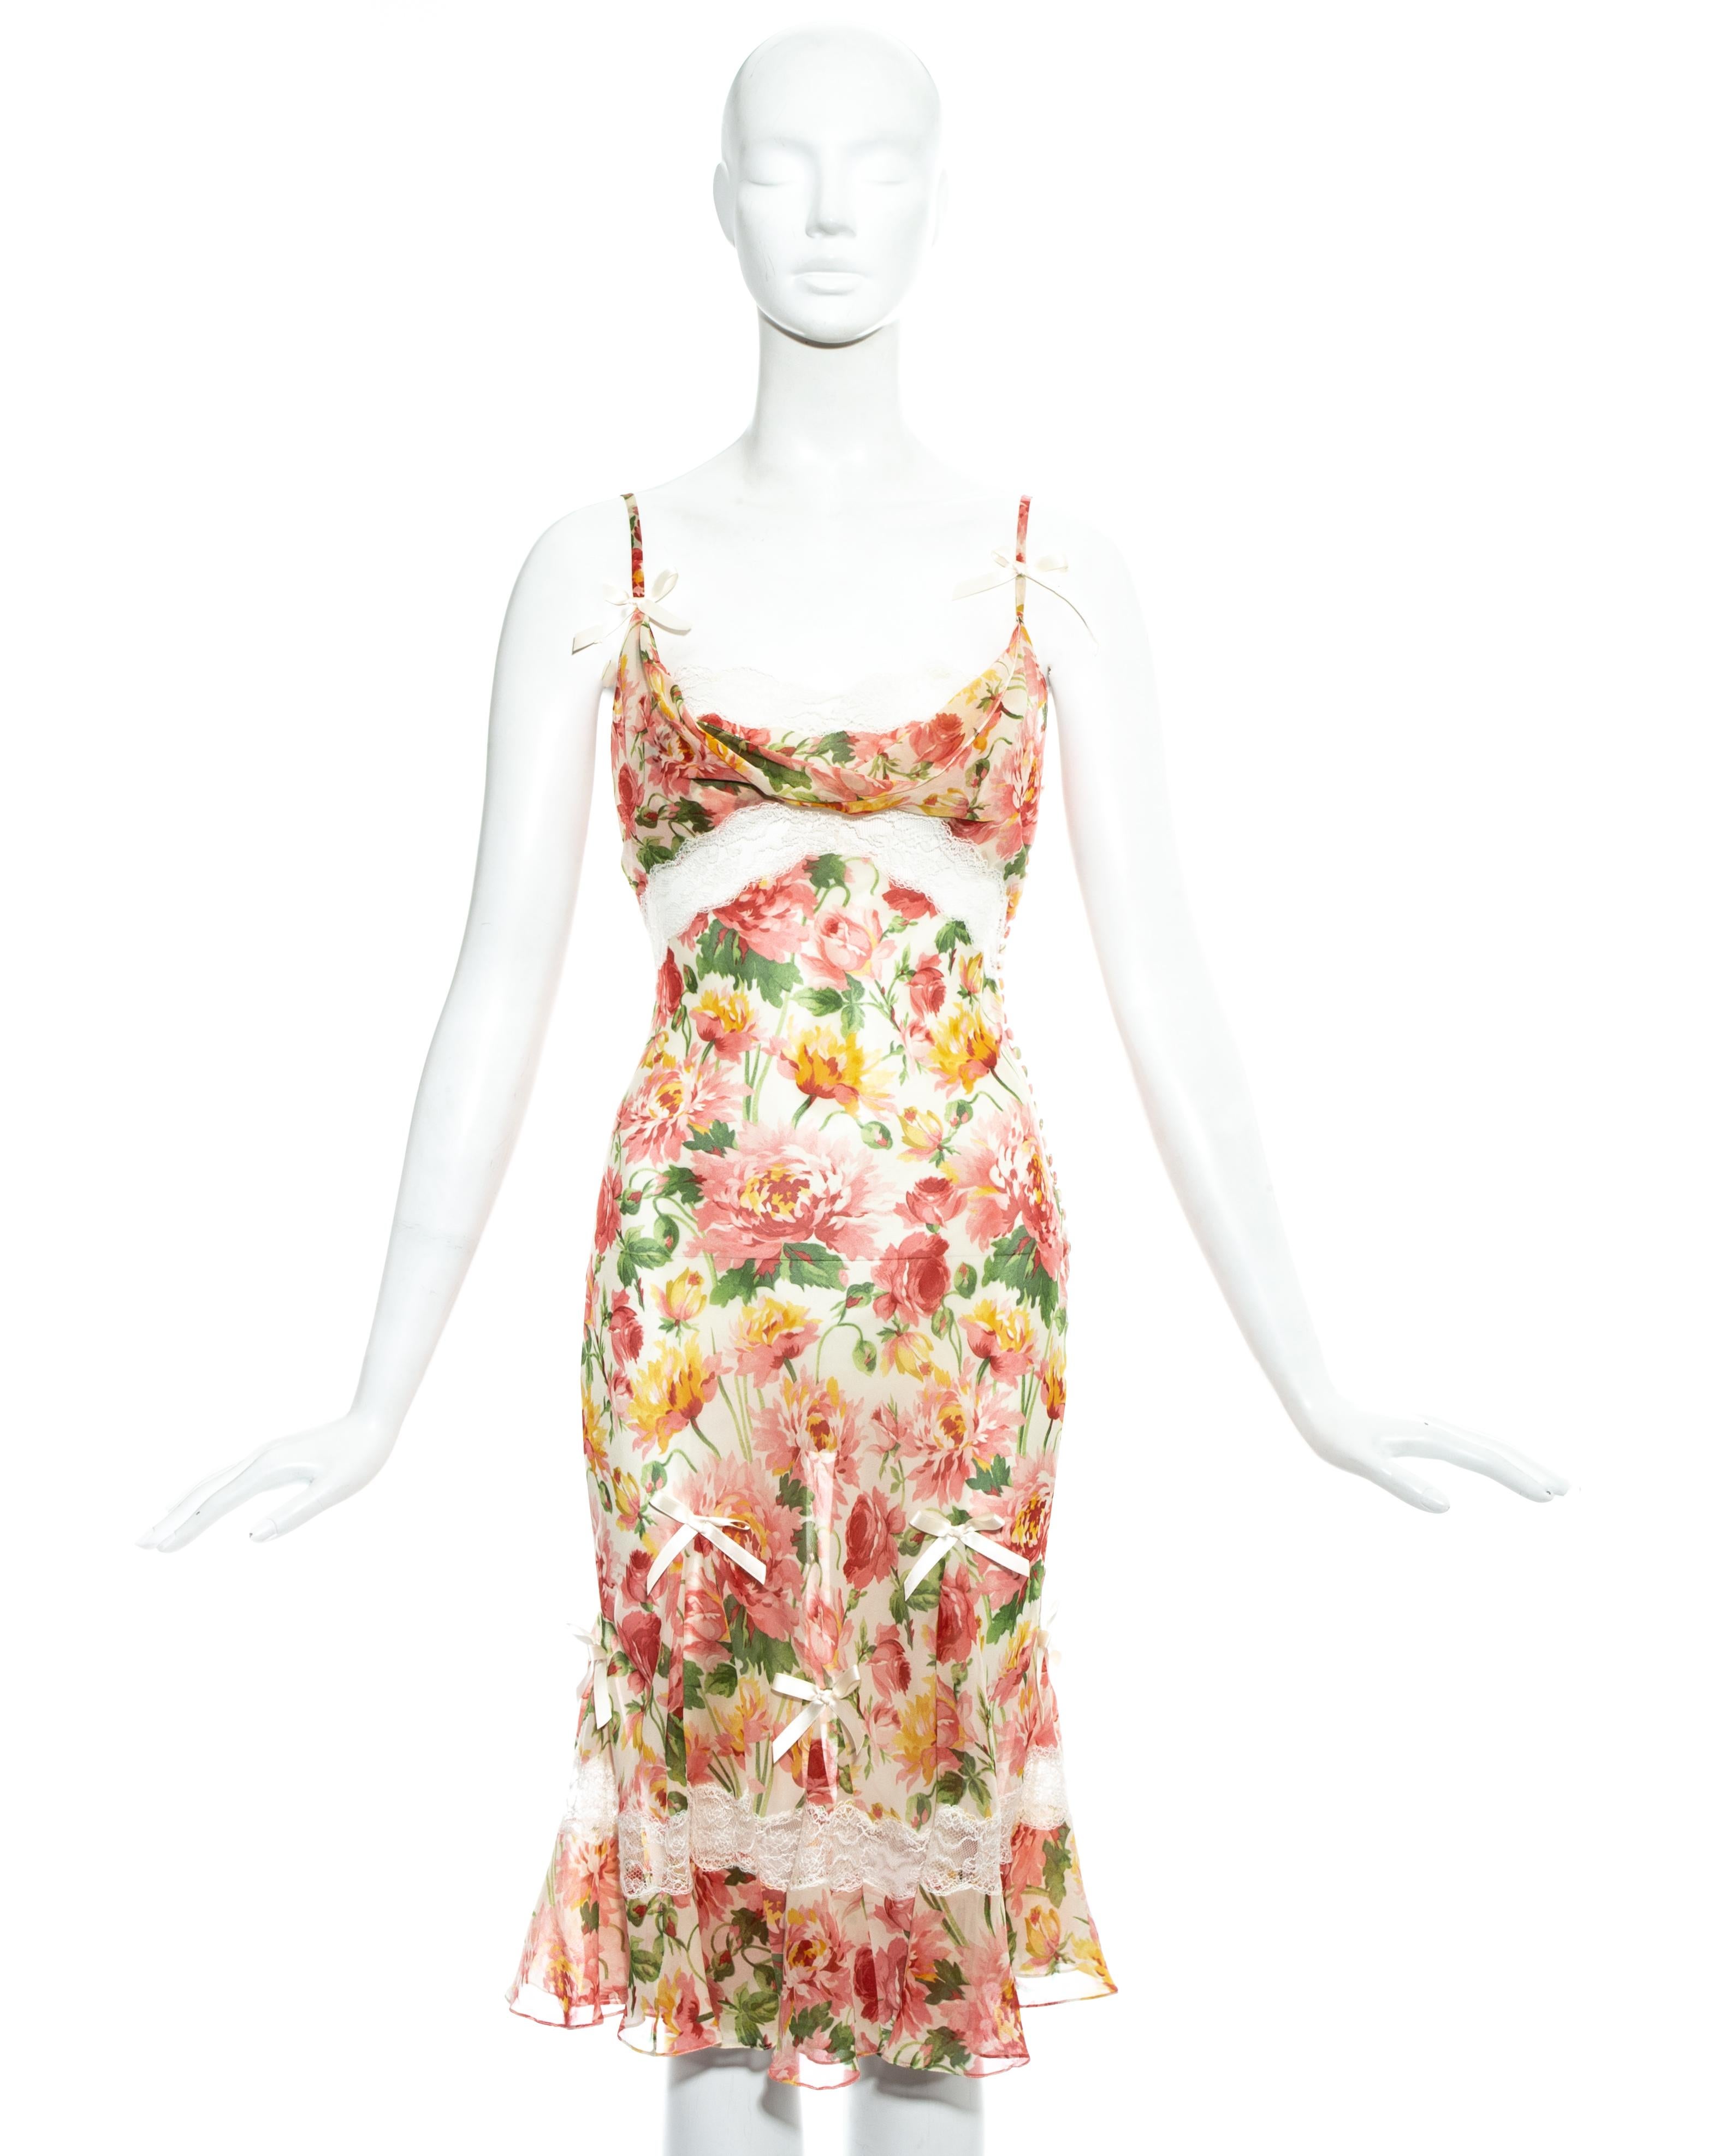 Christian Dior by John Galliano; floral silk chiffon and lace mid-length bias cut dress.  

 - White lace inserts and trim 
- Decorative silk ribbon bows  
- 27 fabric button fastenings on side seam  
- Sold with optional slip dress  